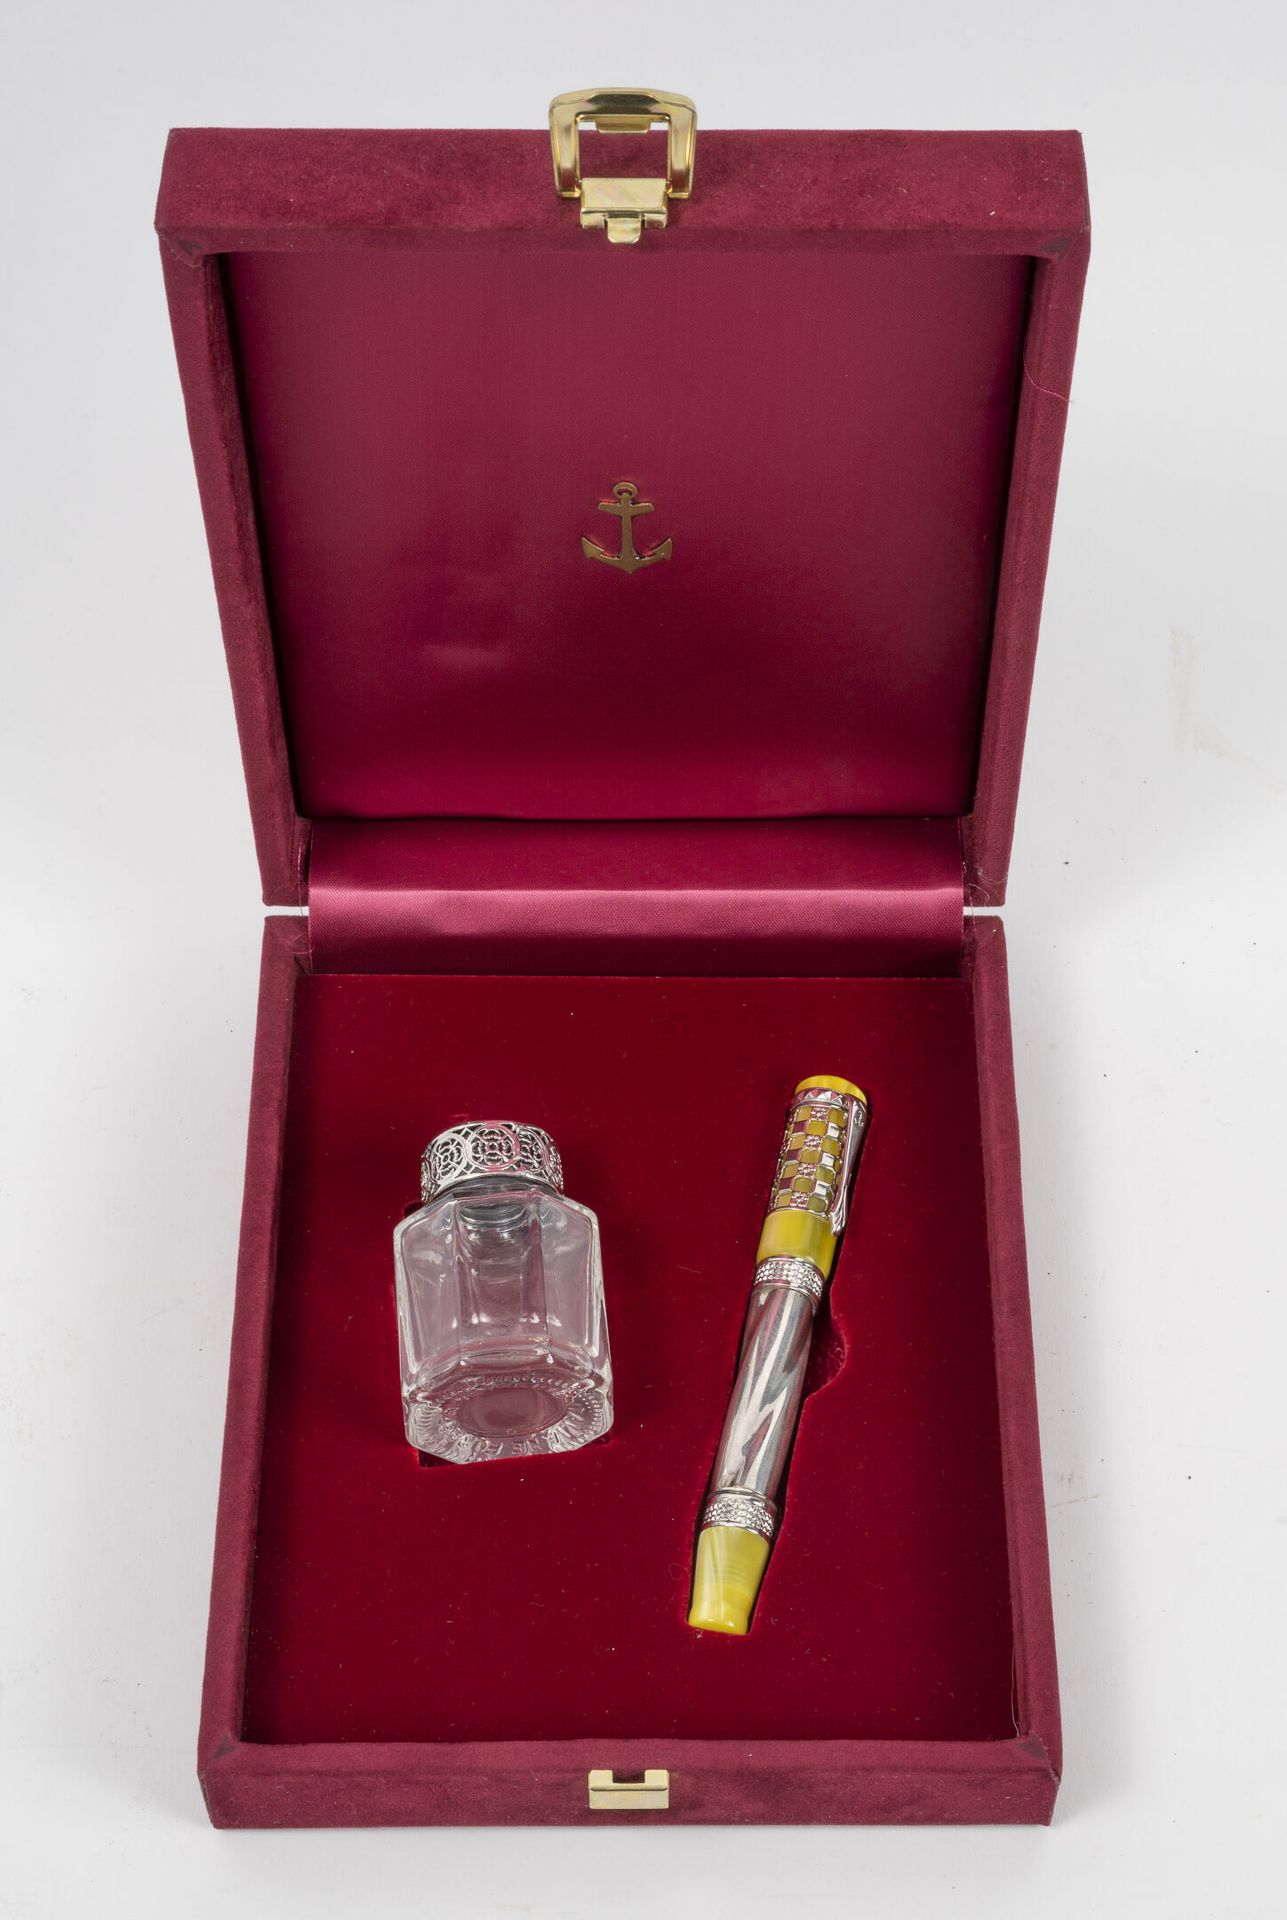 ANCORA Fountain pen and inkwell.
Fountain pen in white gold (750). Exempted from&hellip;